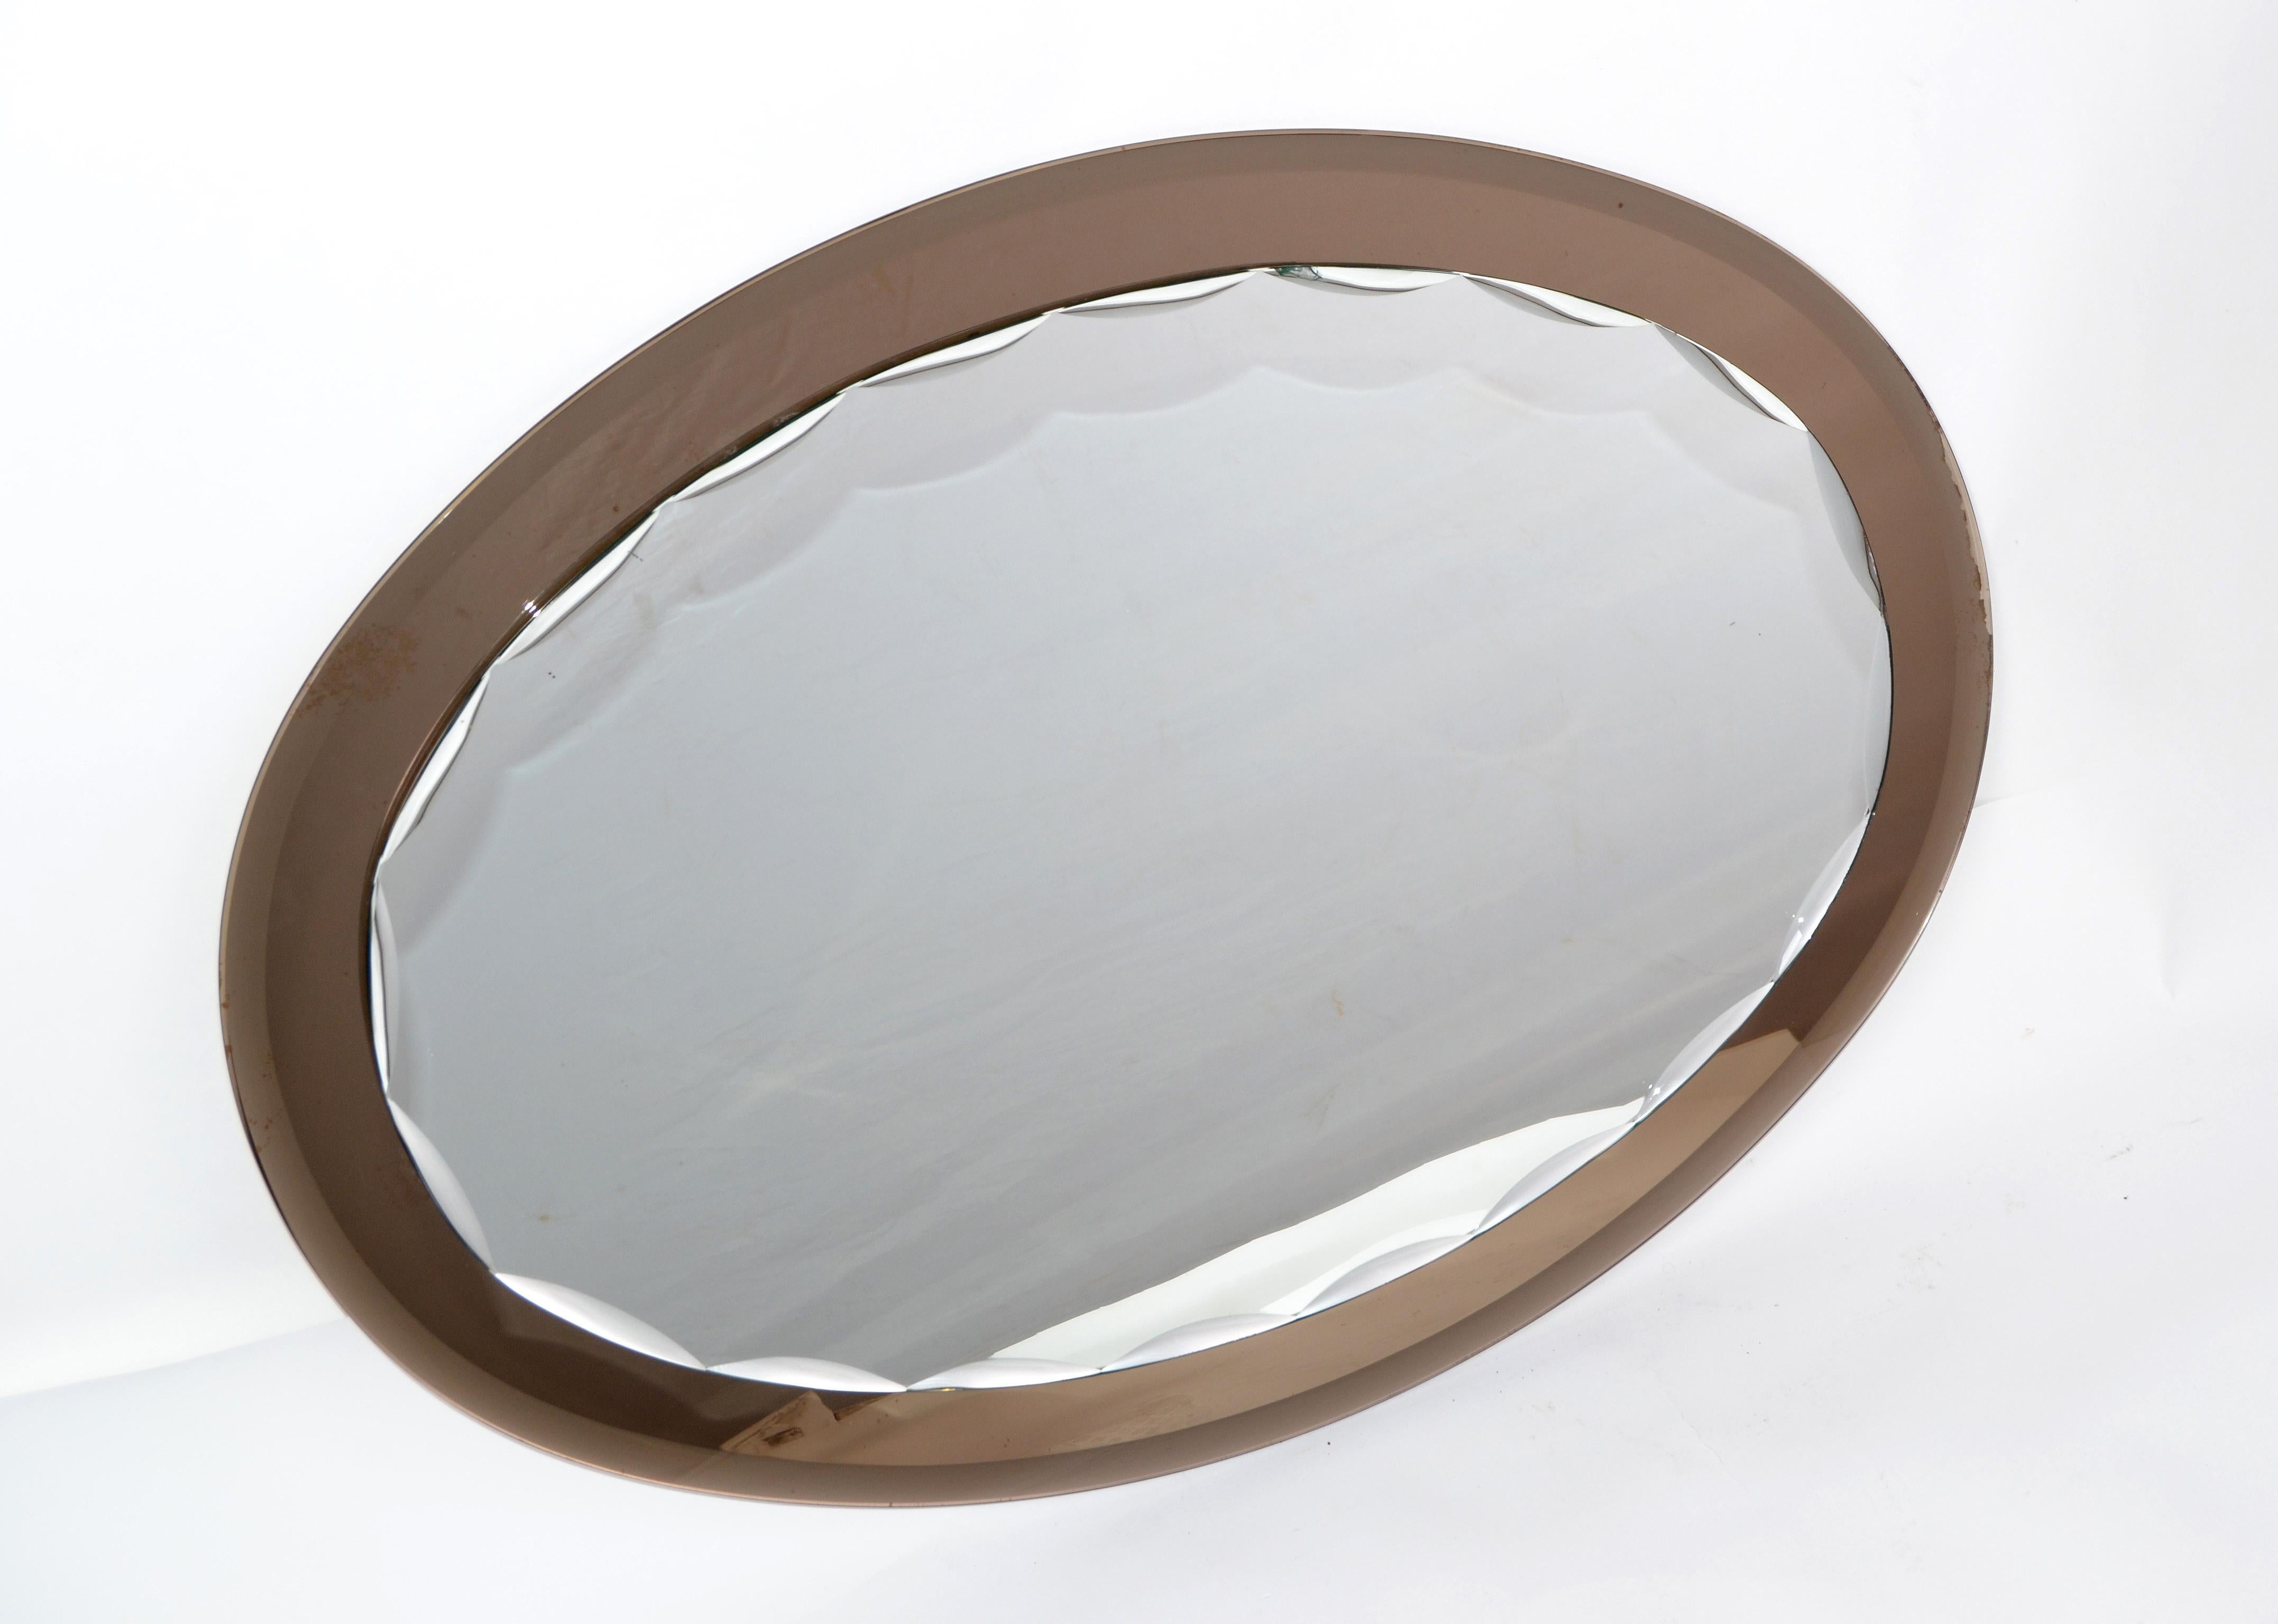 Mid-Century Modern Veca faceted wall mirror and beveled smoked glass.
Made in Italy, circa 1970
Features a framed backing for secure hanging options.
Measurement: Mirror 27.25 inches high by 18.25 inches wide.